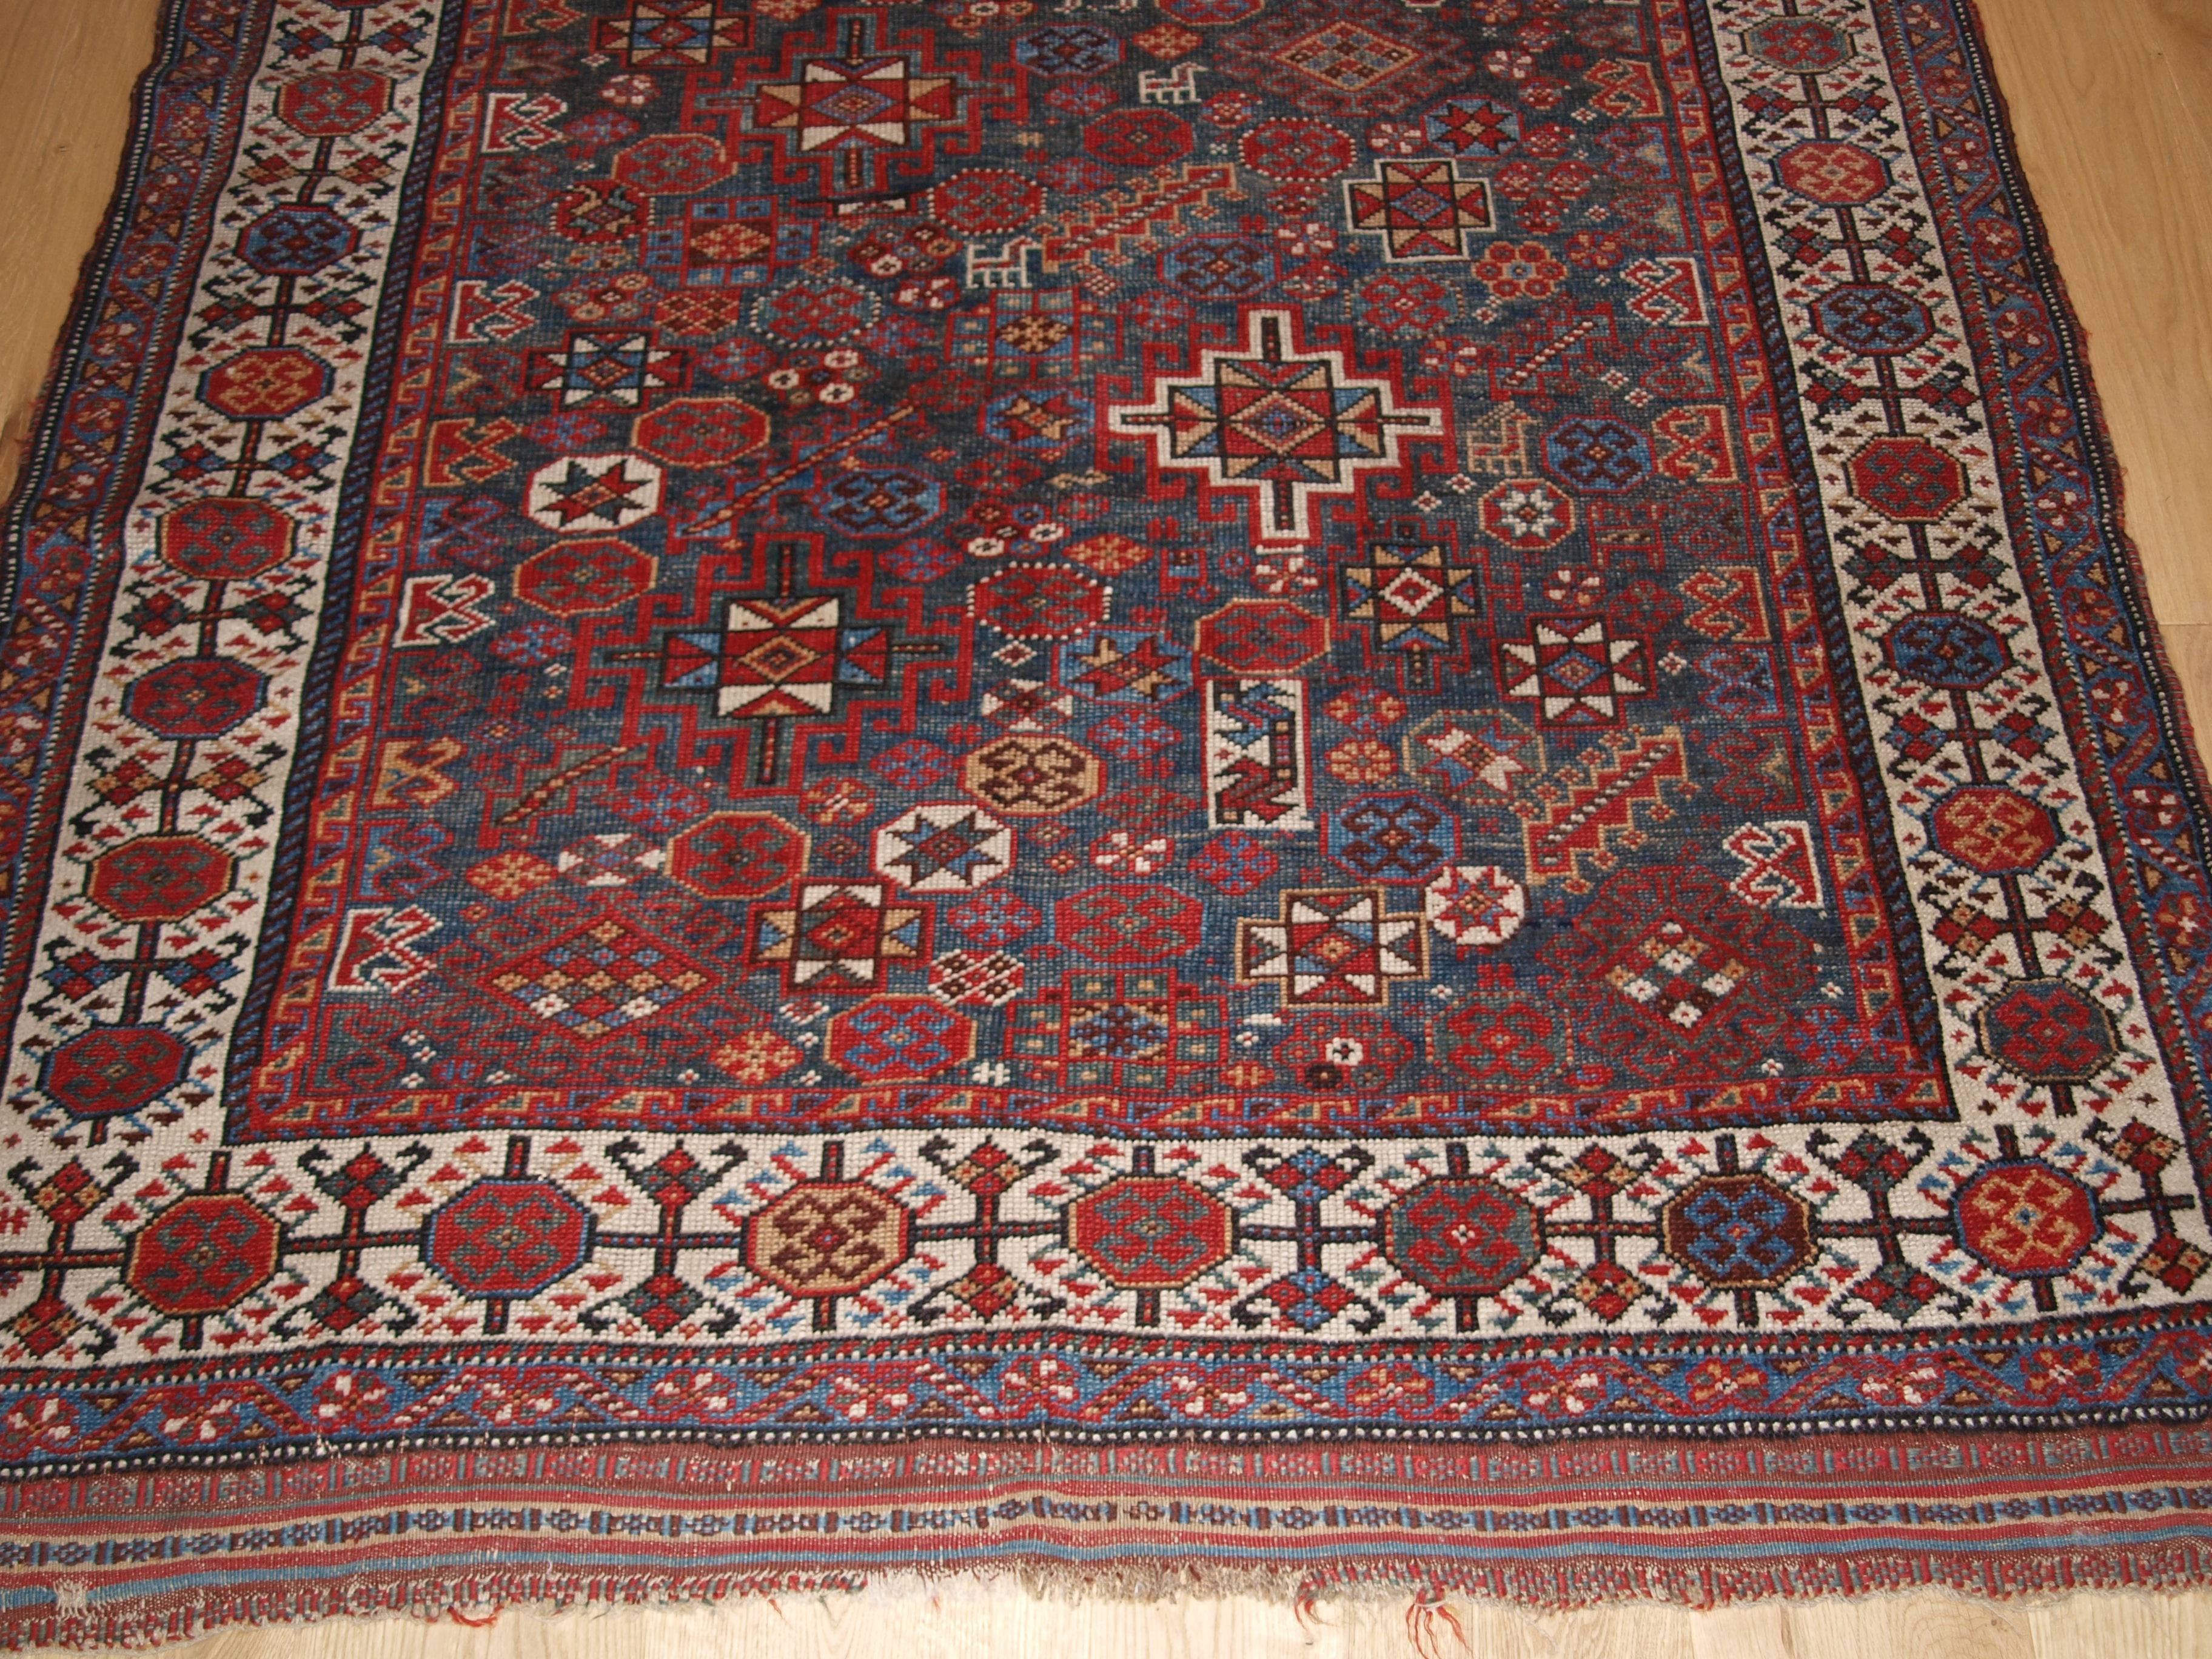 Wool Antique Persian Rug by the Luri Tribe, Shekarlu Design, Grey Blue, circa 1900 For Sale